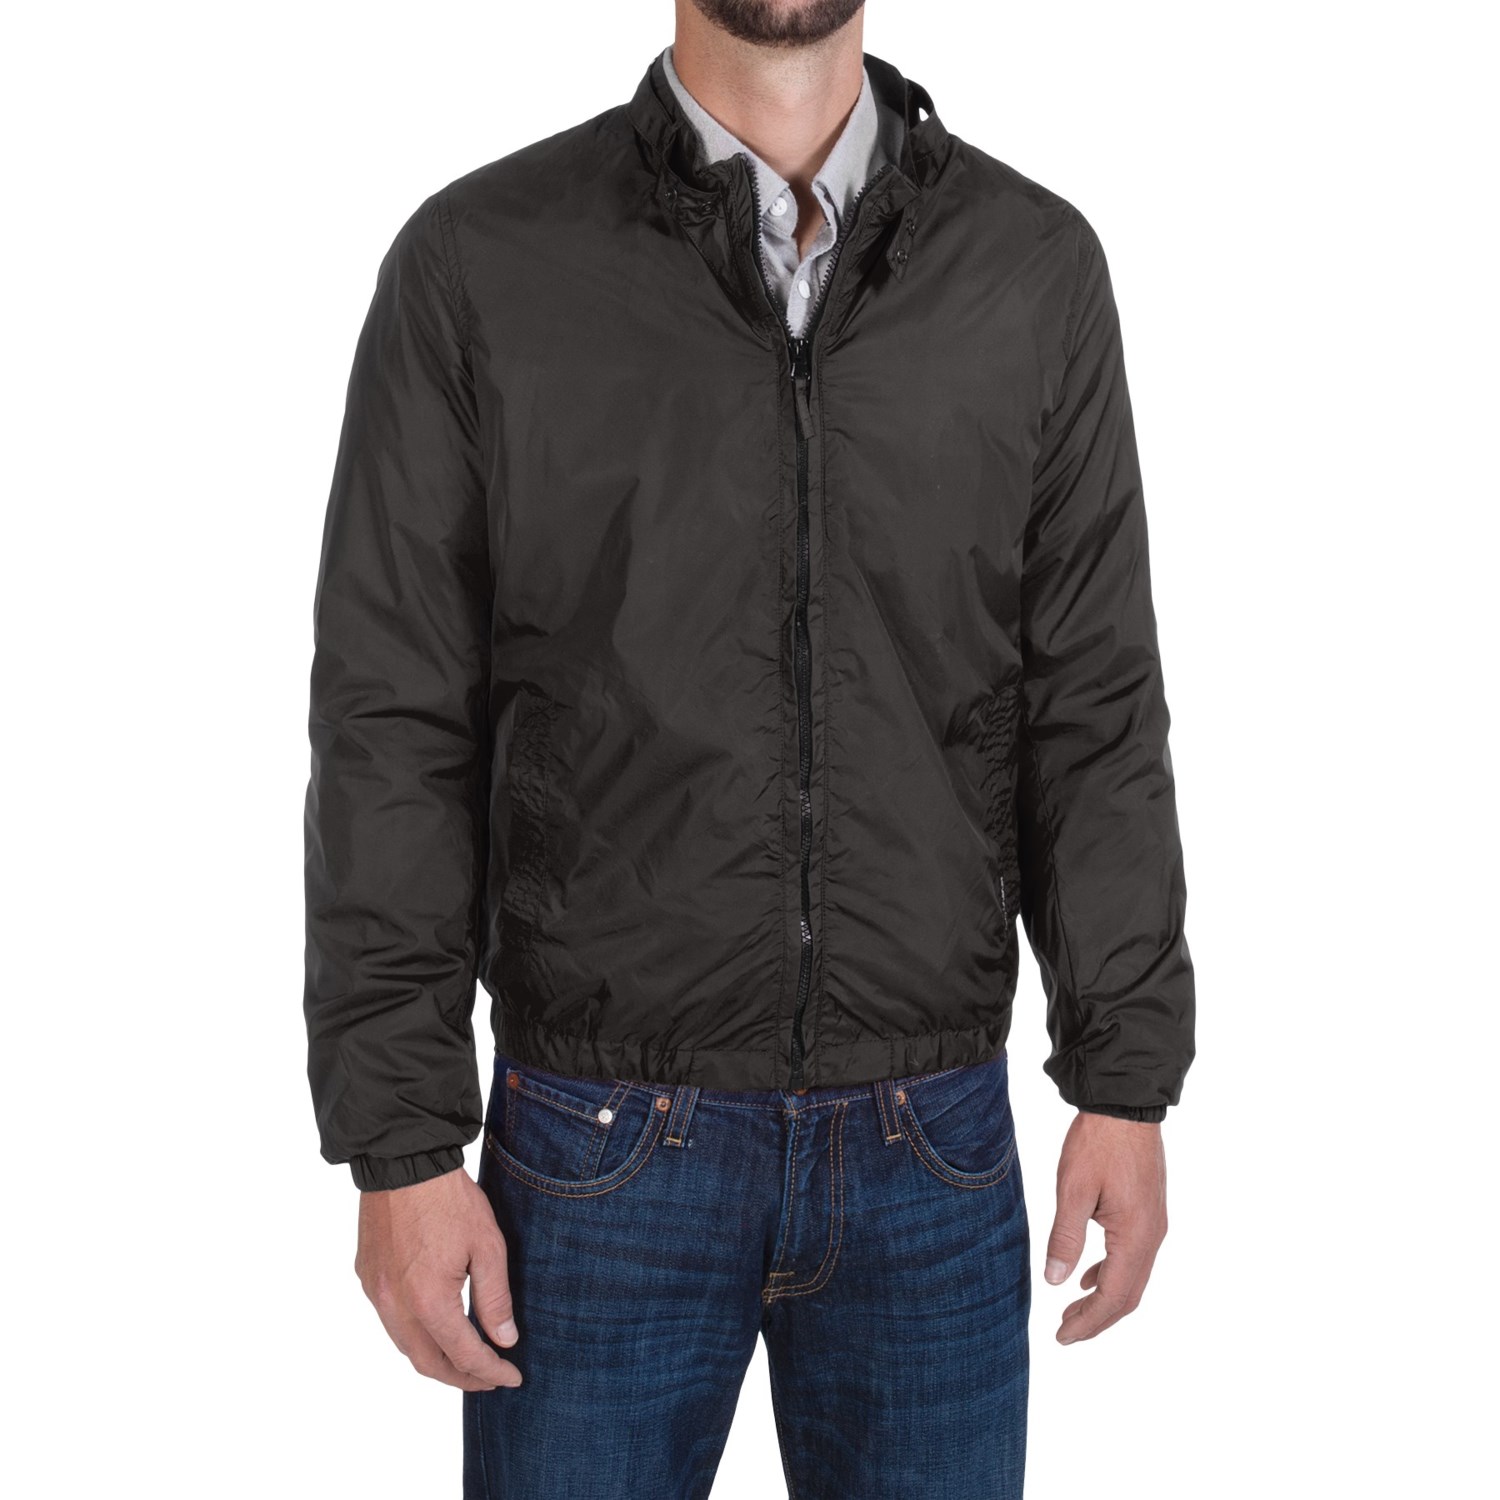 Members Only Packable Jacket (For Men) - Save 68%